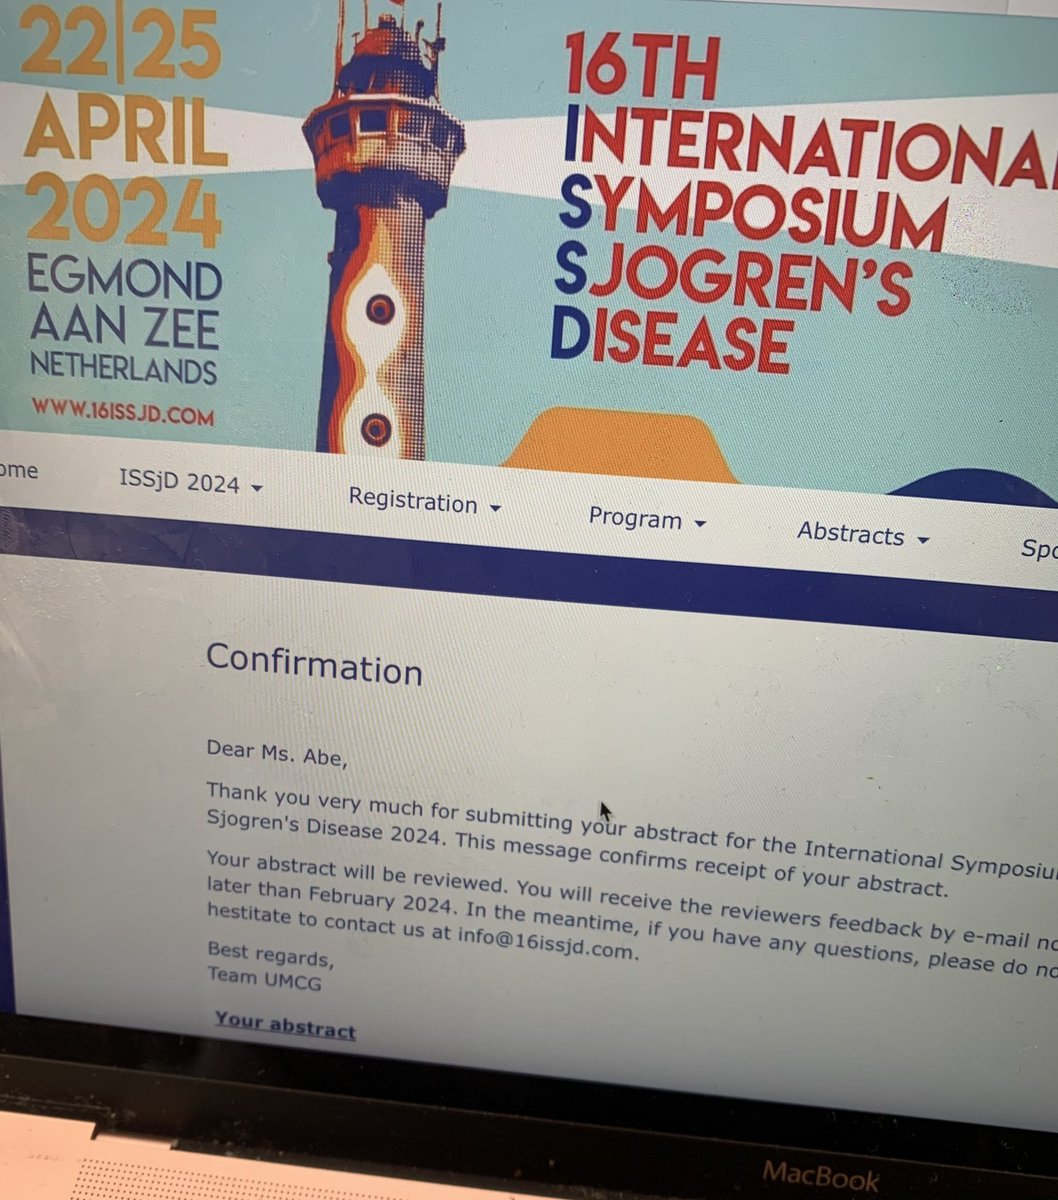 The abstract deadline for @ISSjD2024 is ❗️today❗️
I made it🥹🙌
ギリギリセーフ🎉

Note that it’s “#Sjogrens disease” in the upcoming symposium👇